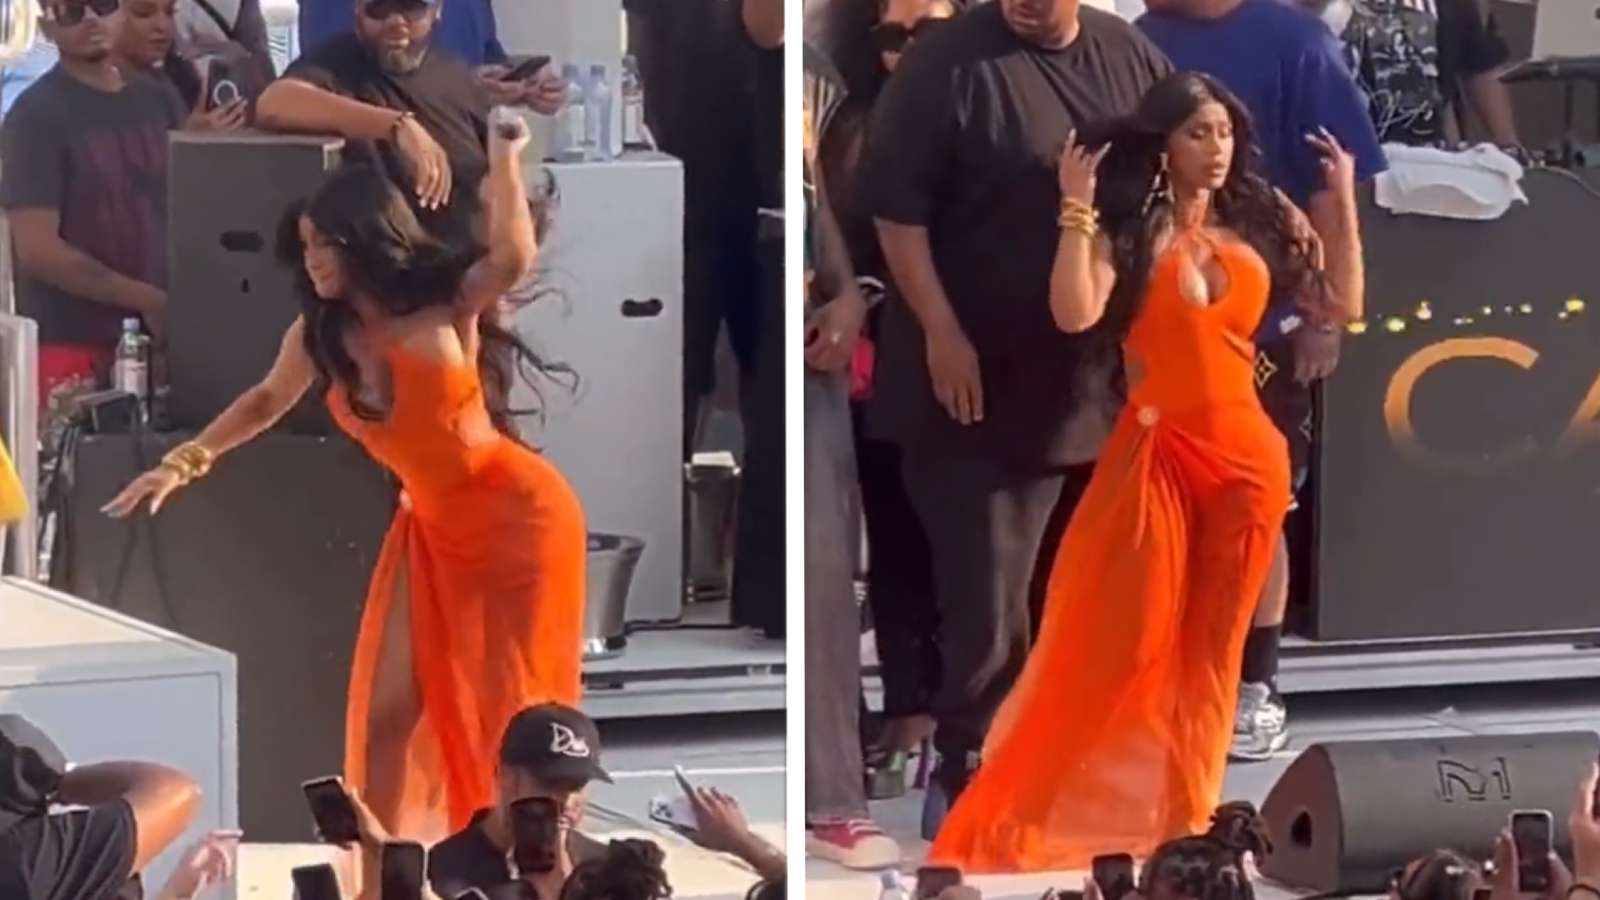 Cardi B goes viral after throwing microphone at fan who tossed drink